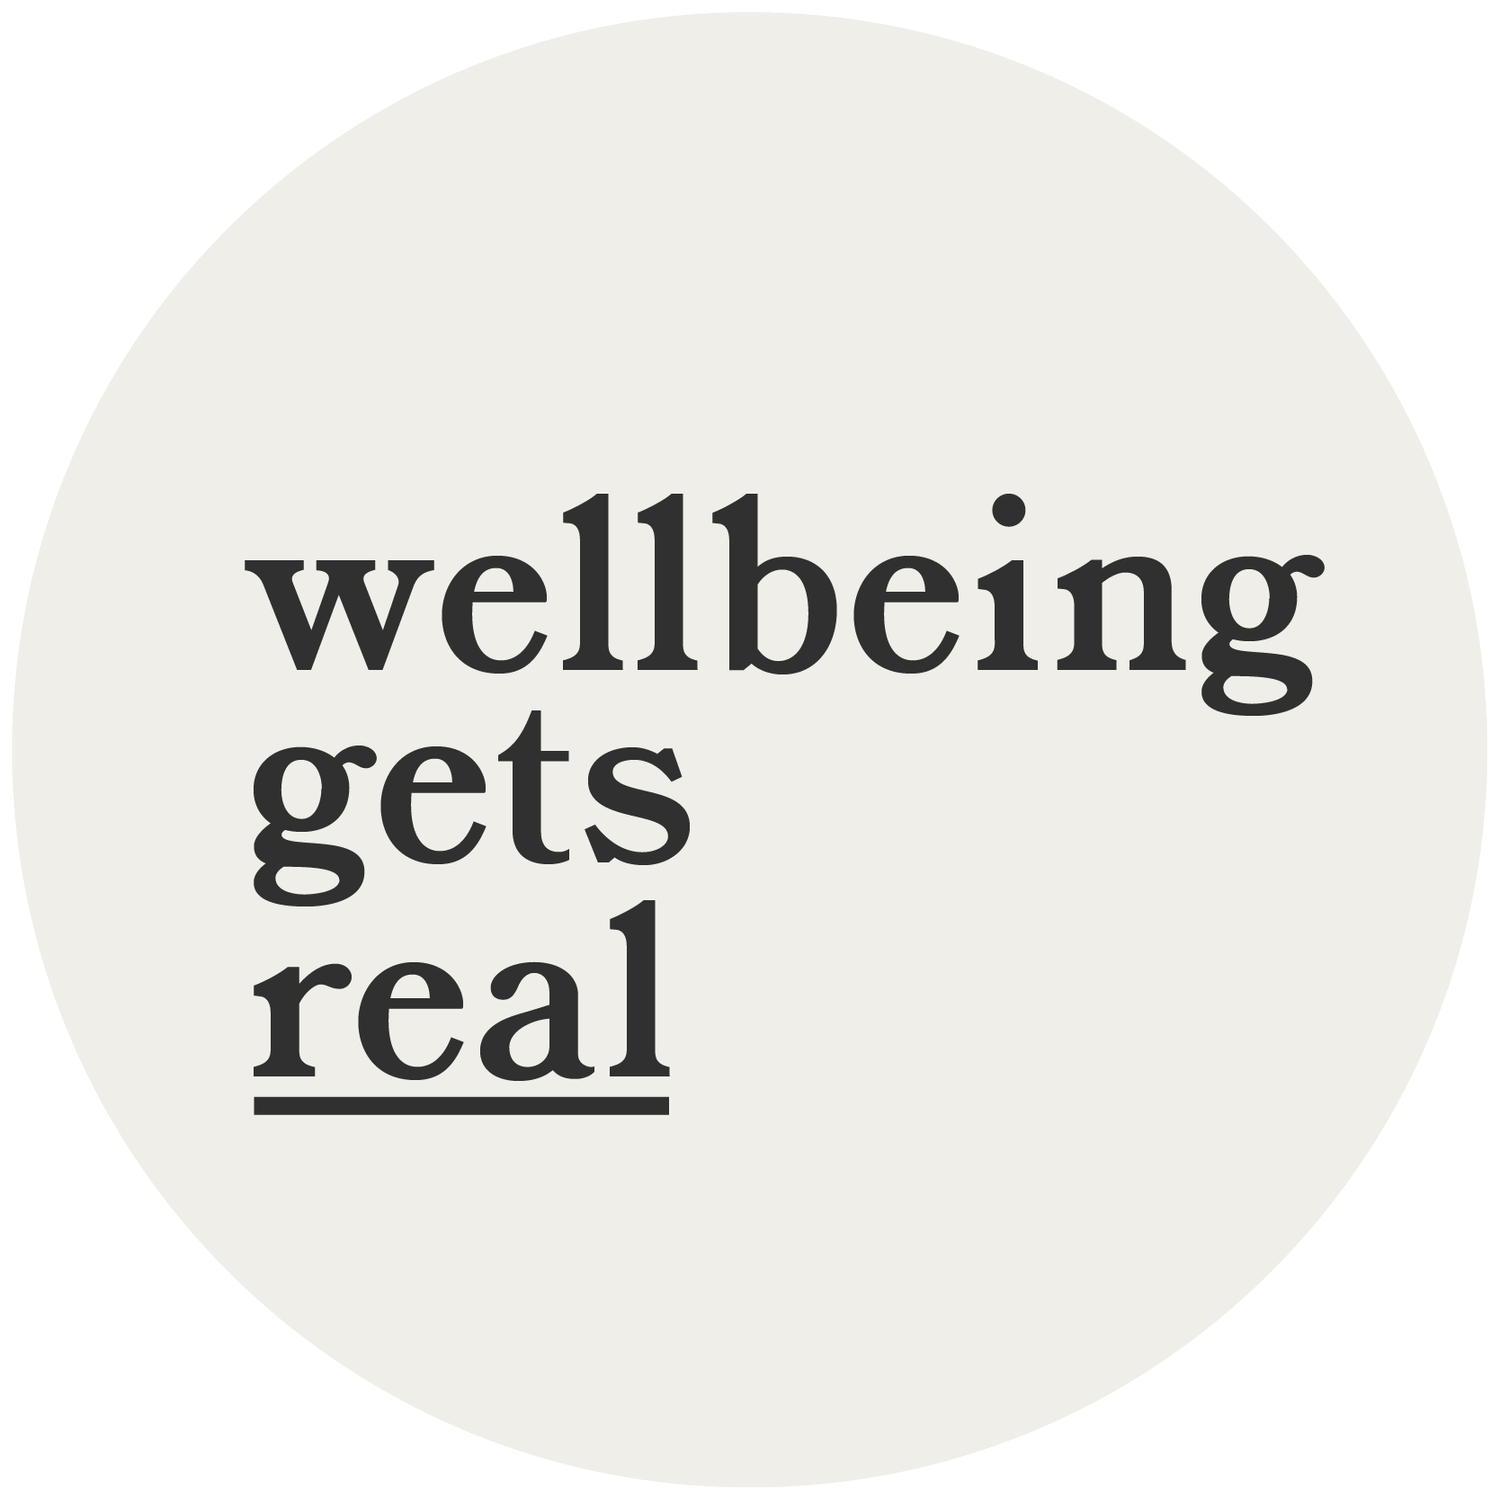 Wellbeing gets real